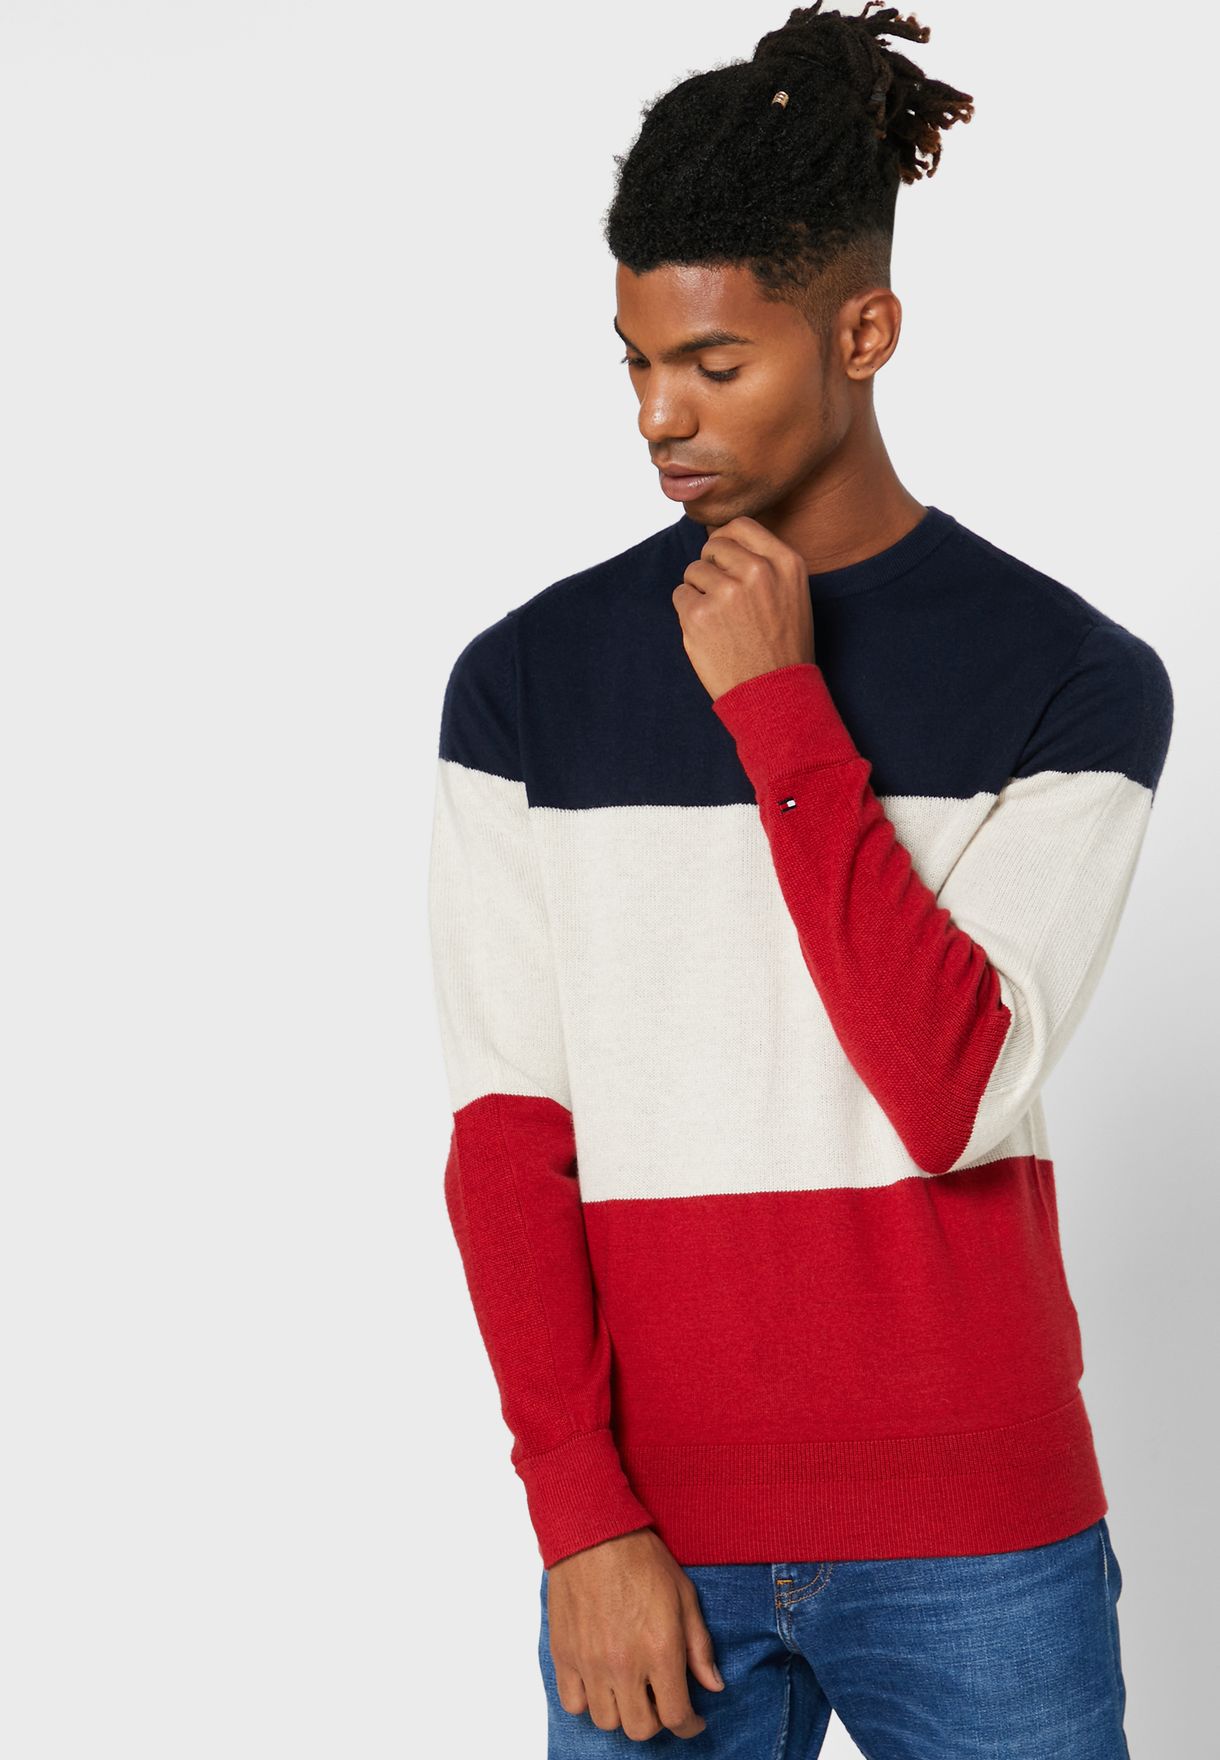 color block tommy hilfiger sweater